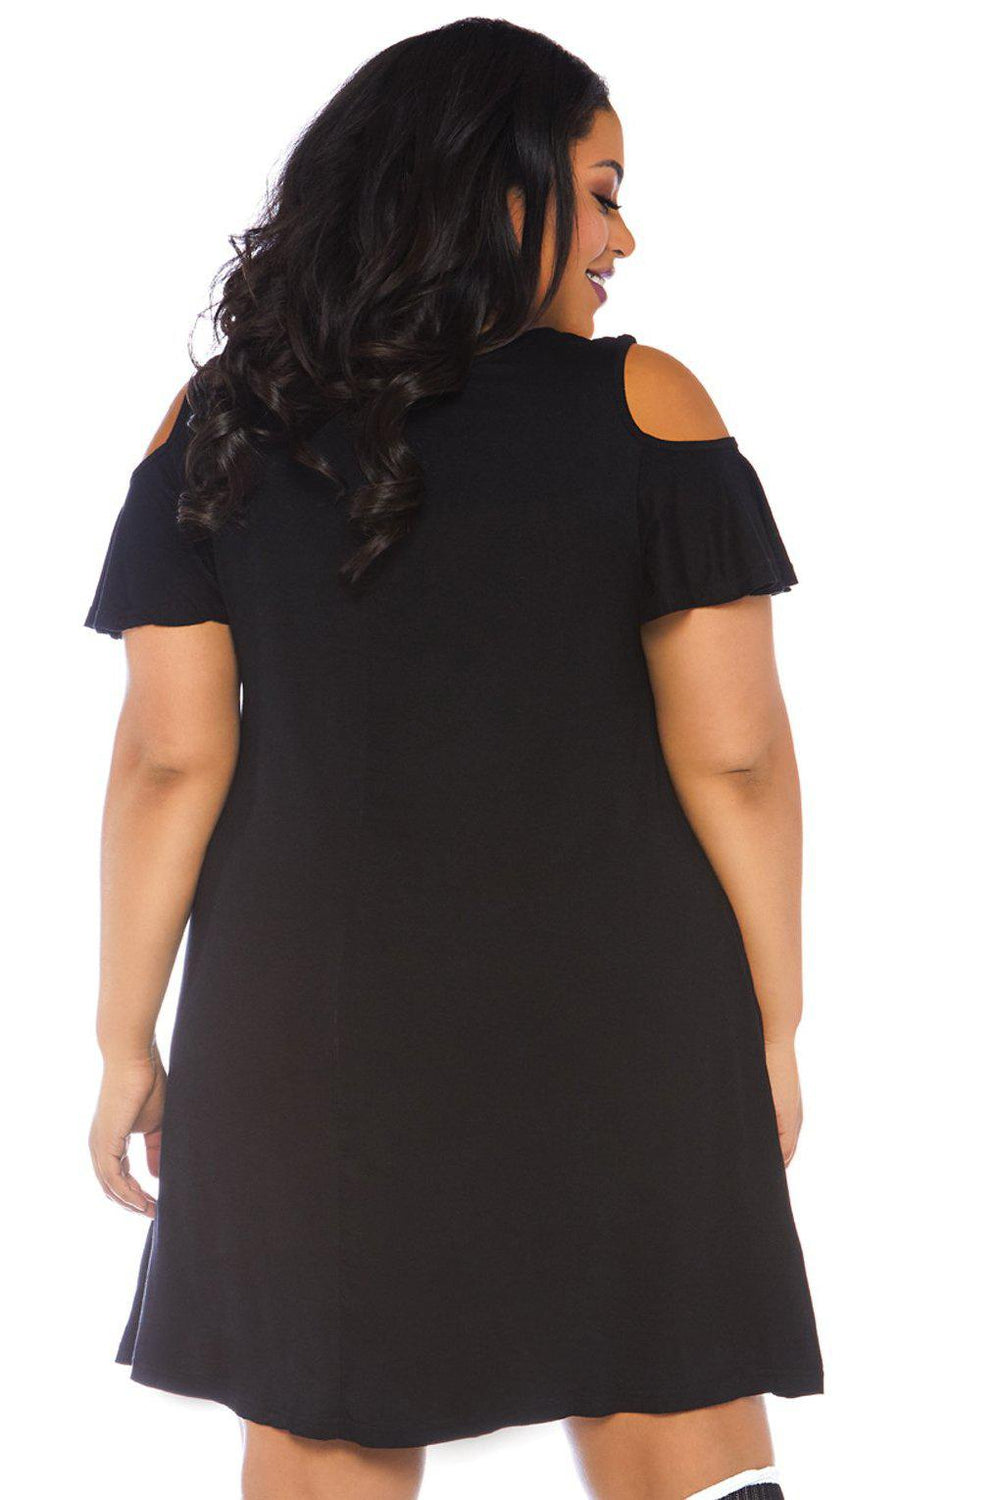 Plus Size More Boos Jersey Dress-Other Costumes-Leg Avenue-SEXYSHOES.COM